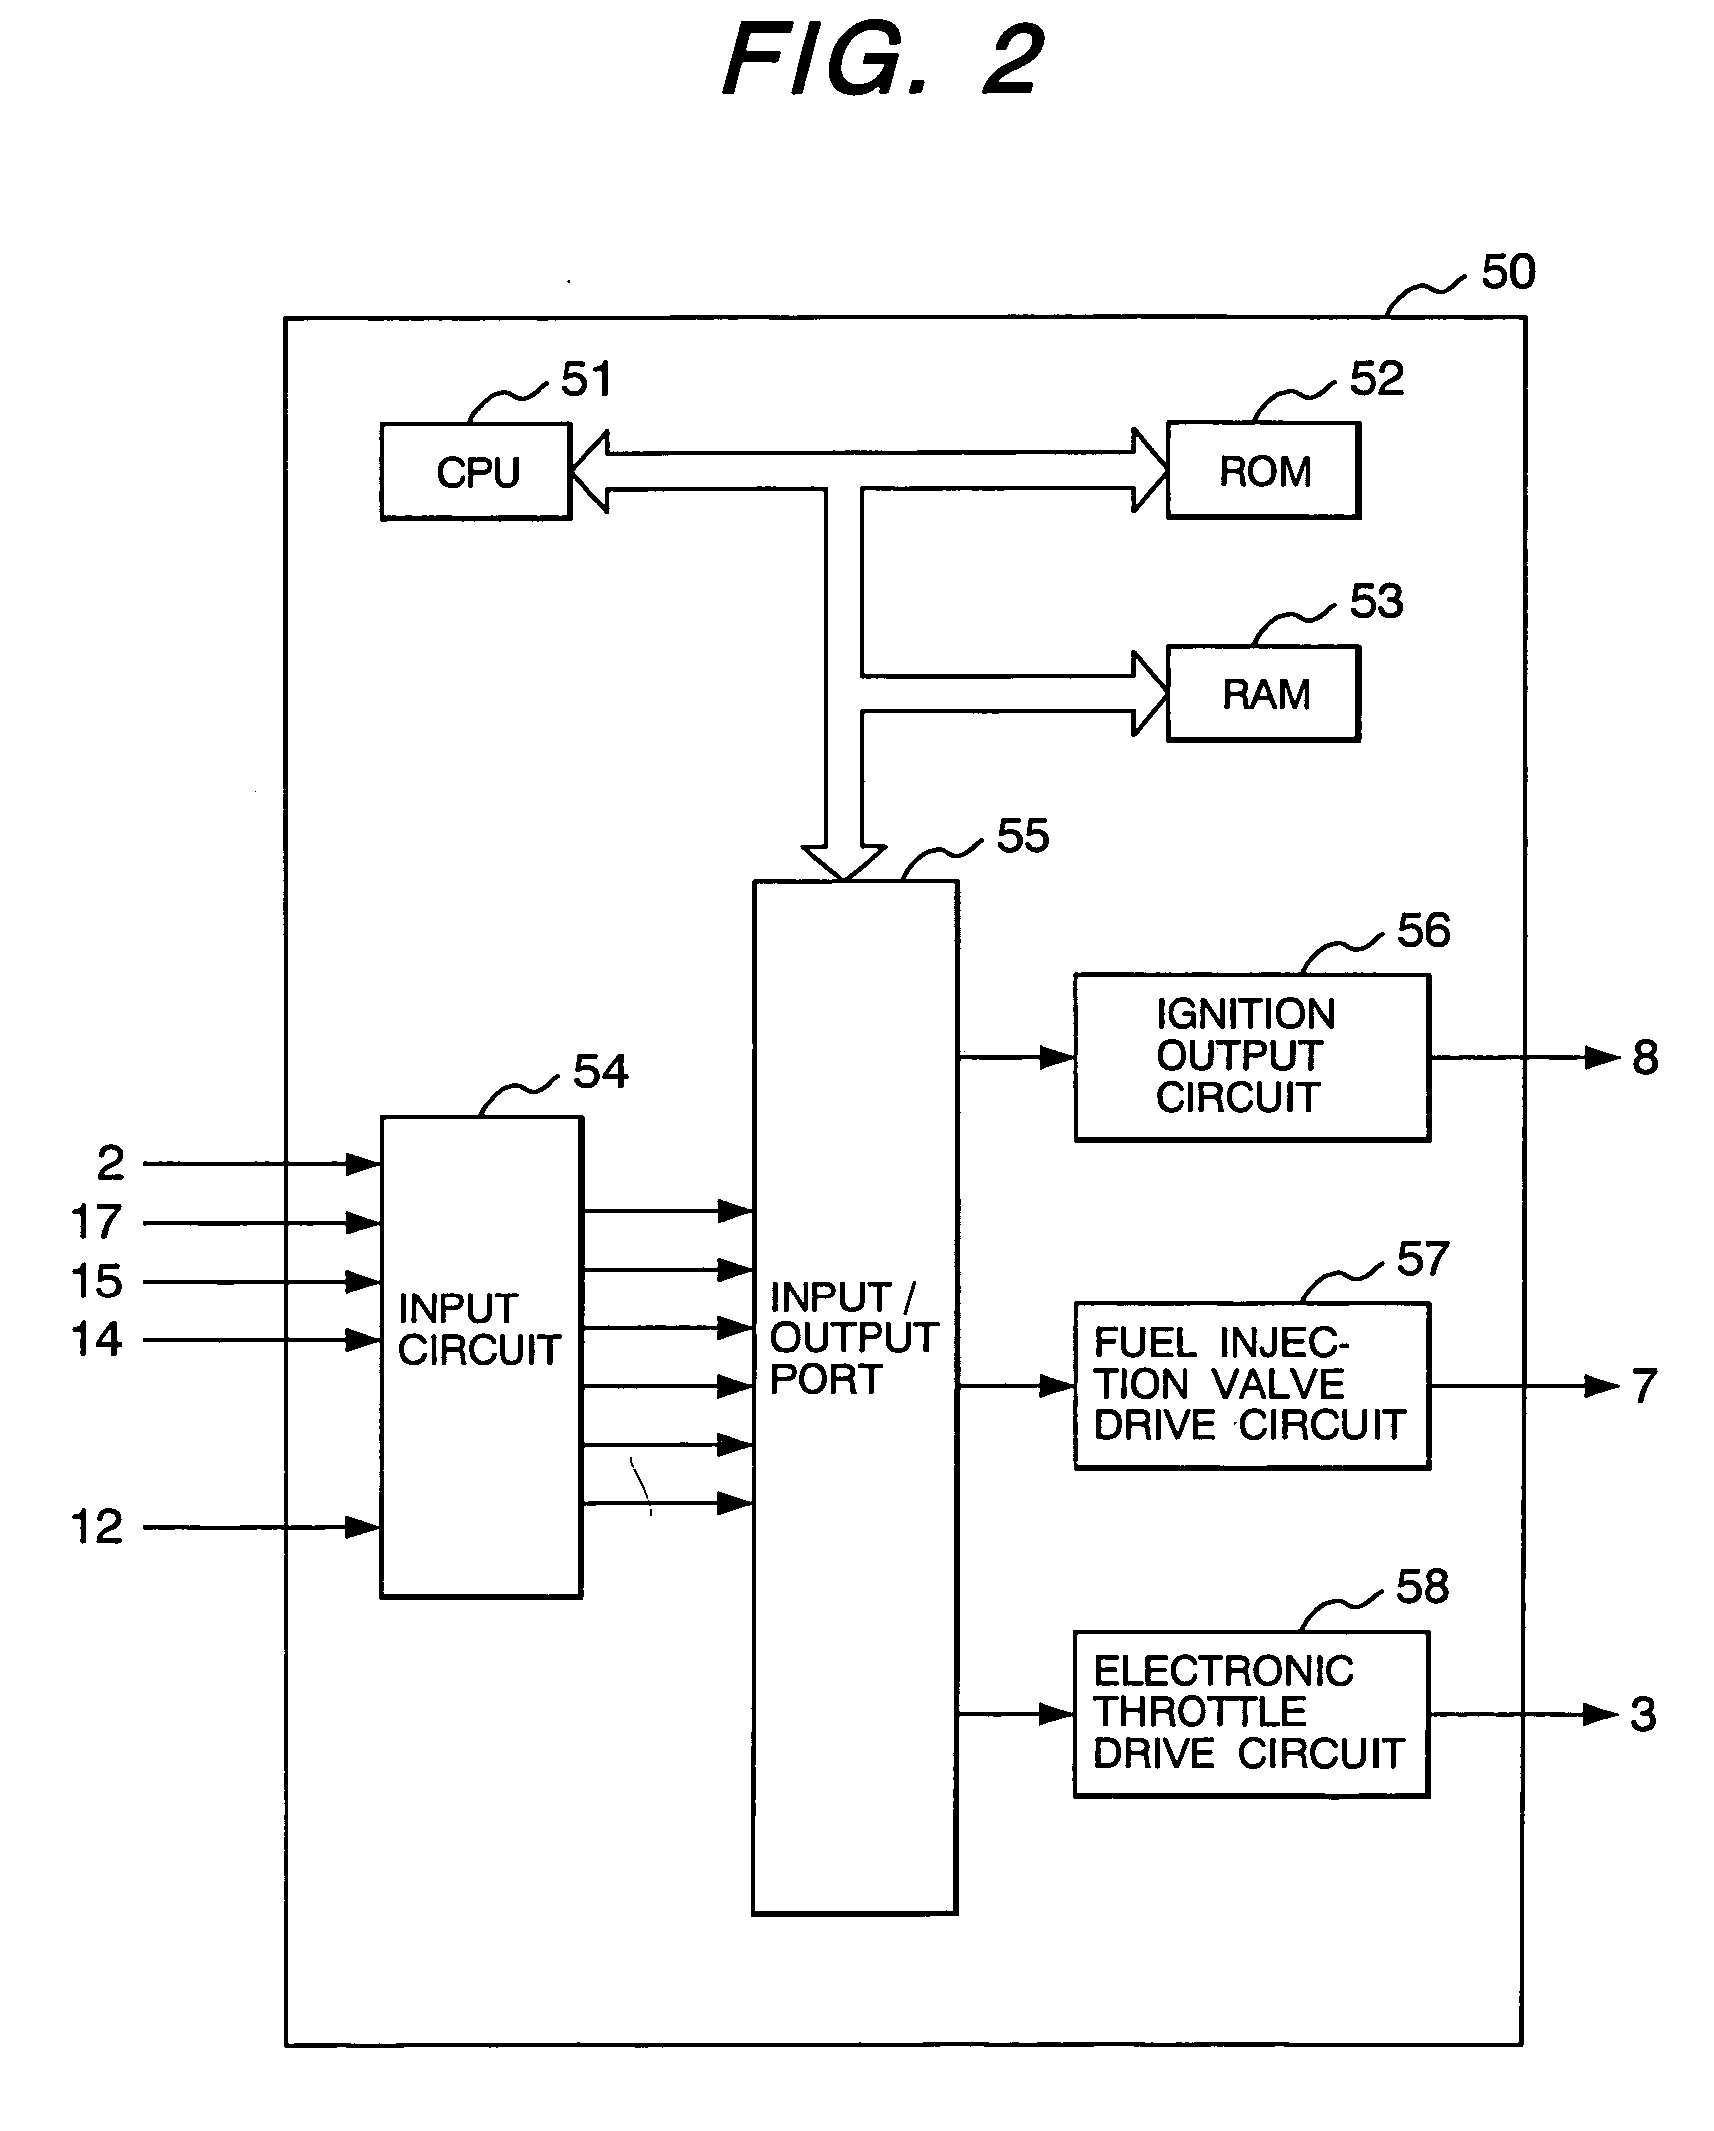 Controller of internal combustion engine